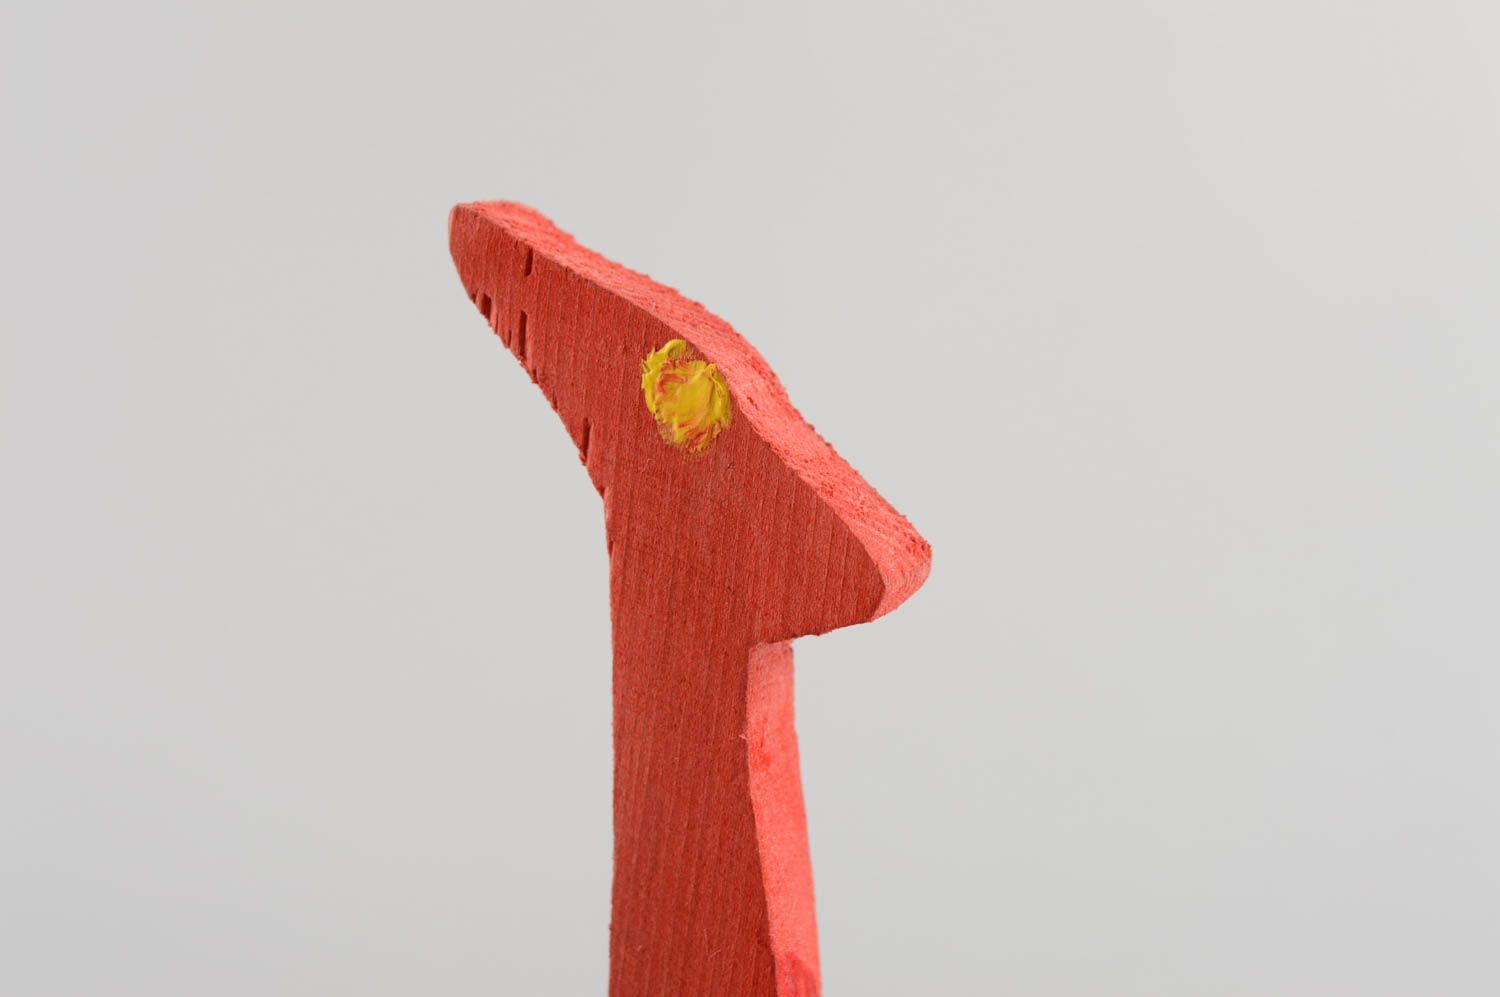 Handmade decorative wall hanging small wooden toy red giraffe for child's room photo 5